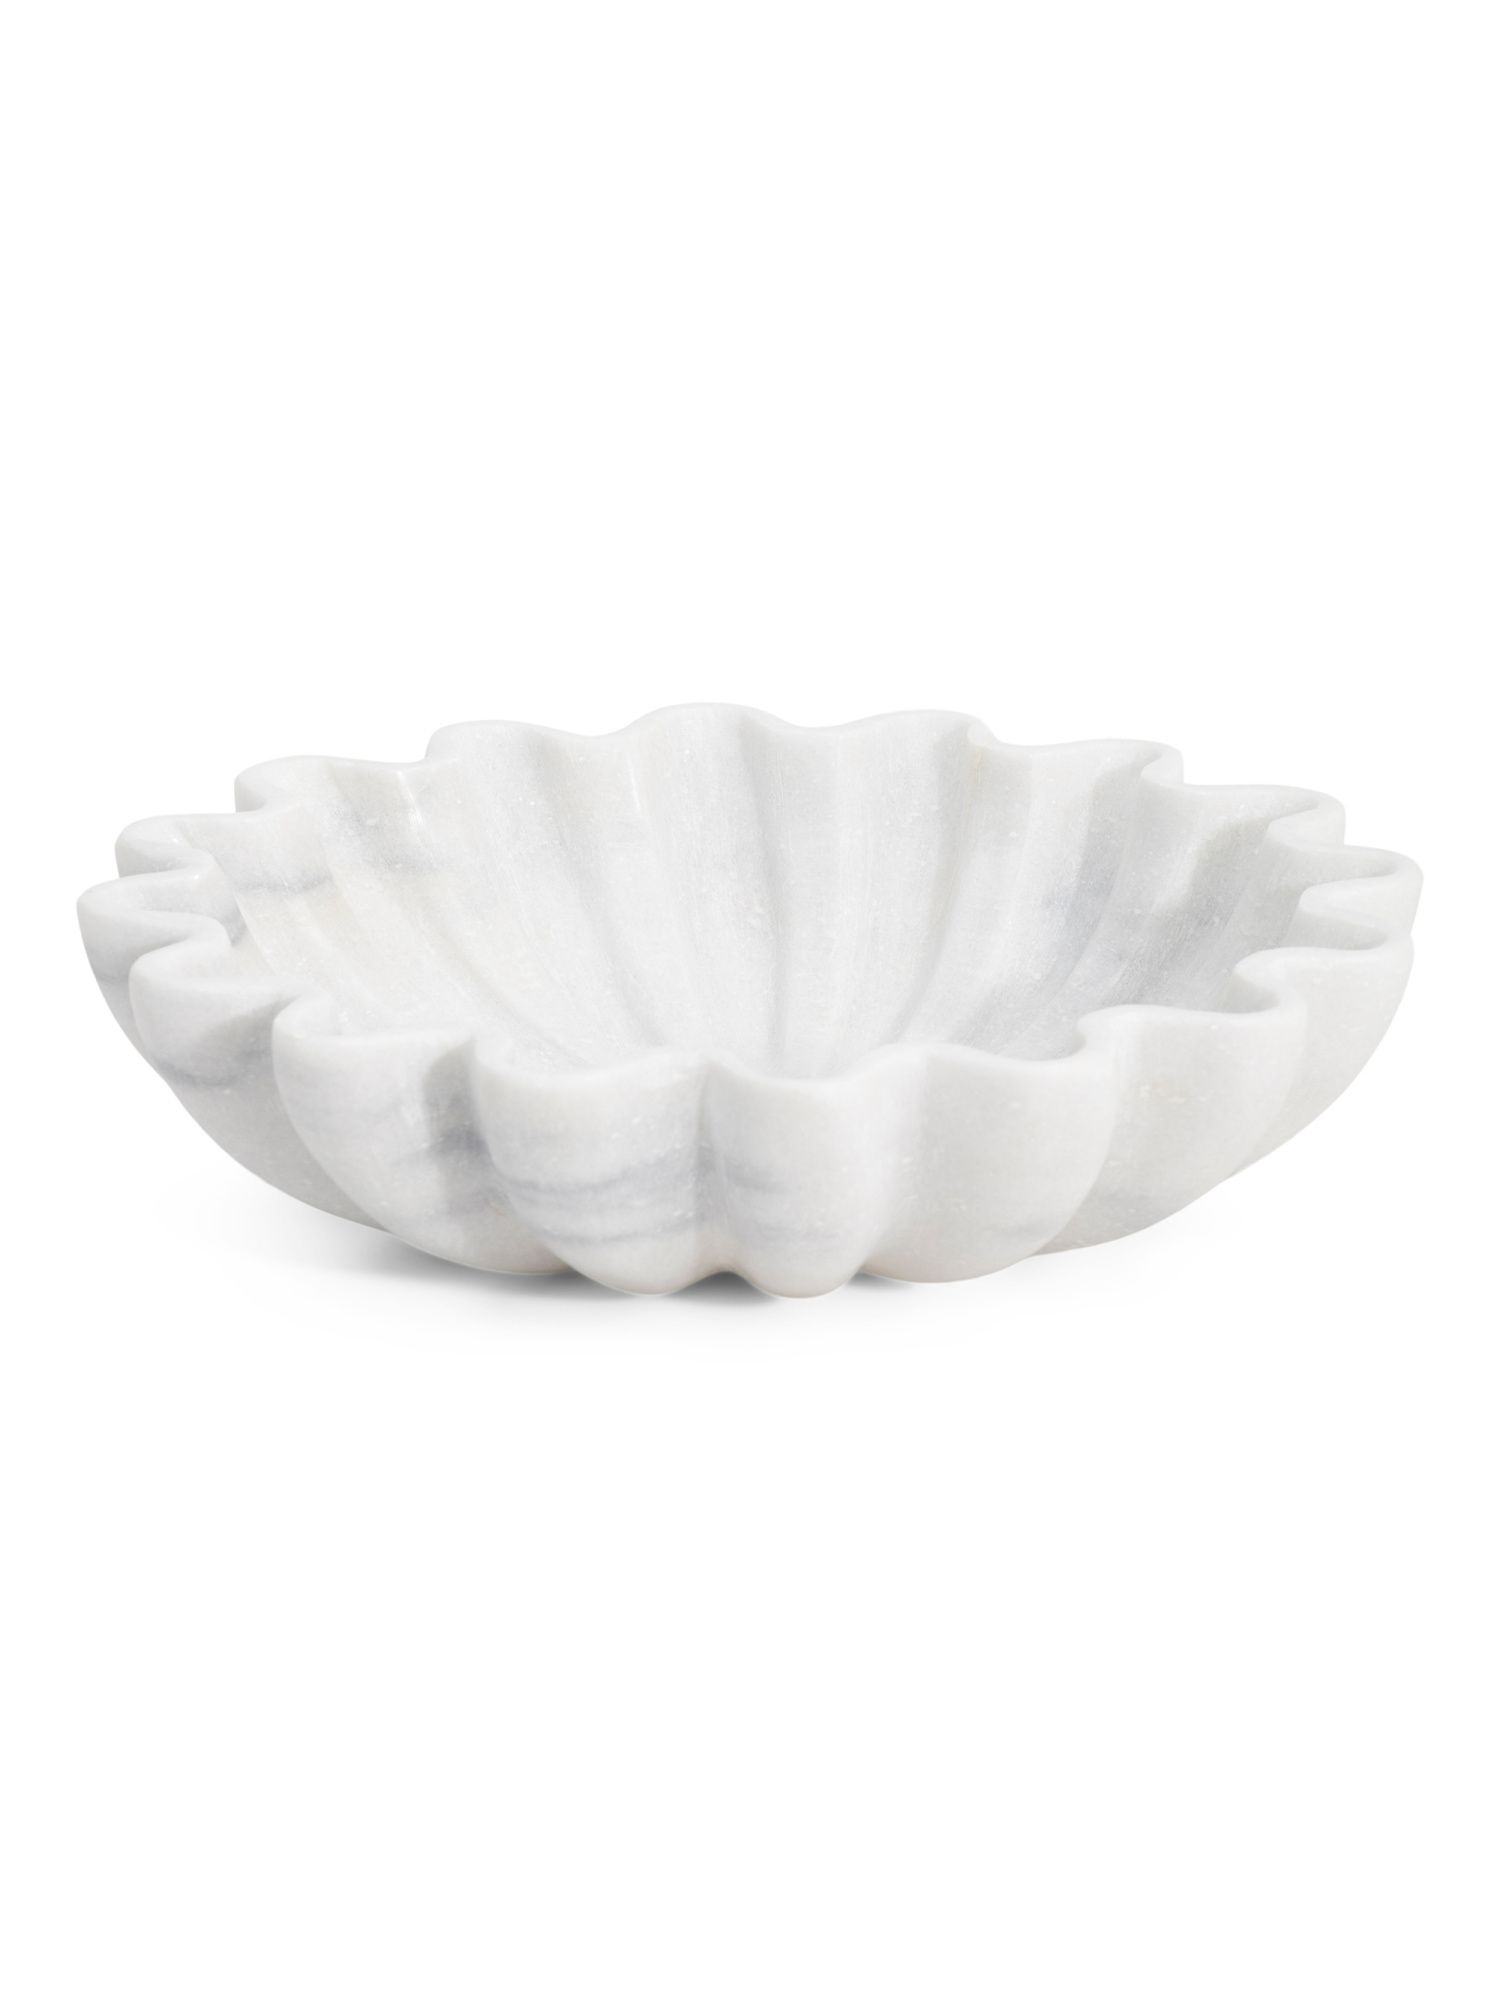 Marble Fluted Bowl | TJ Maxx